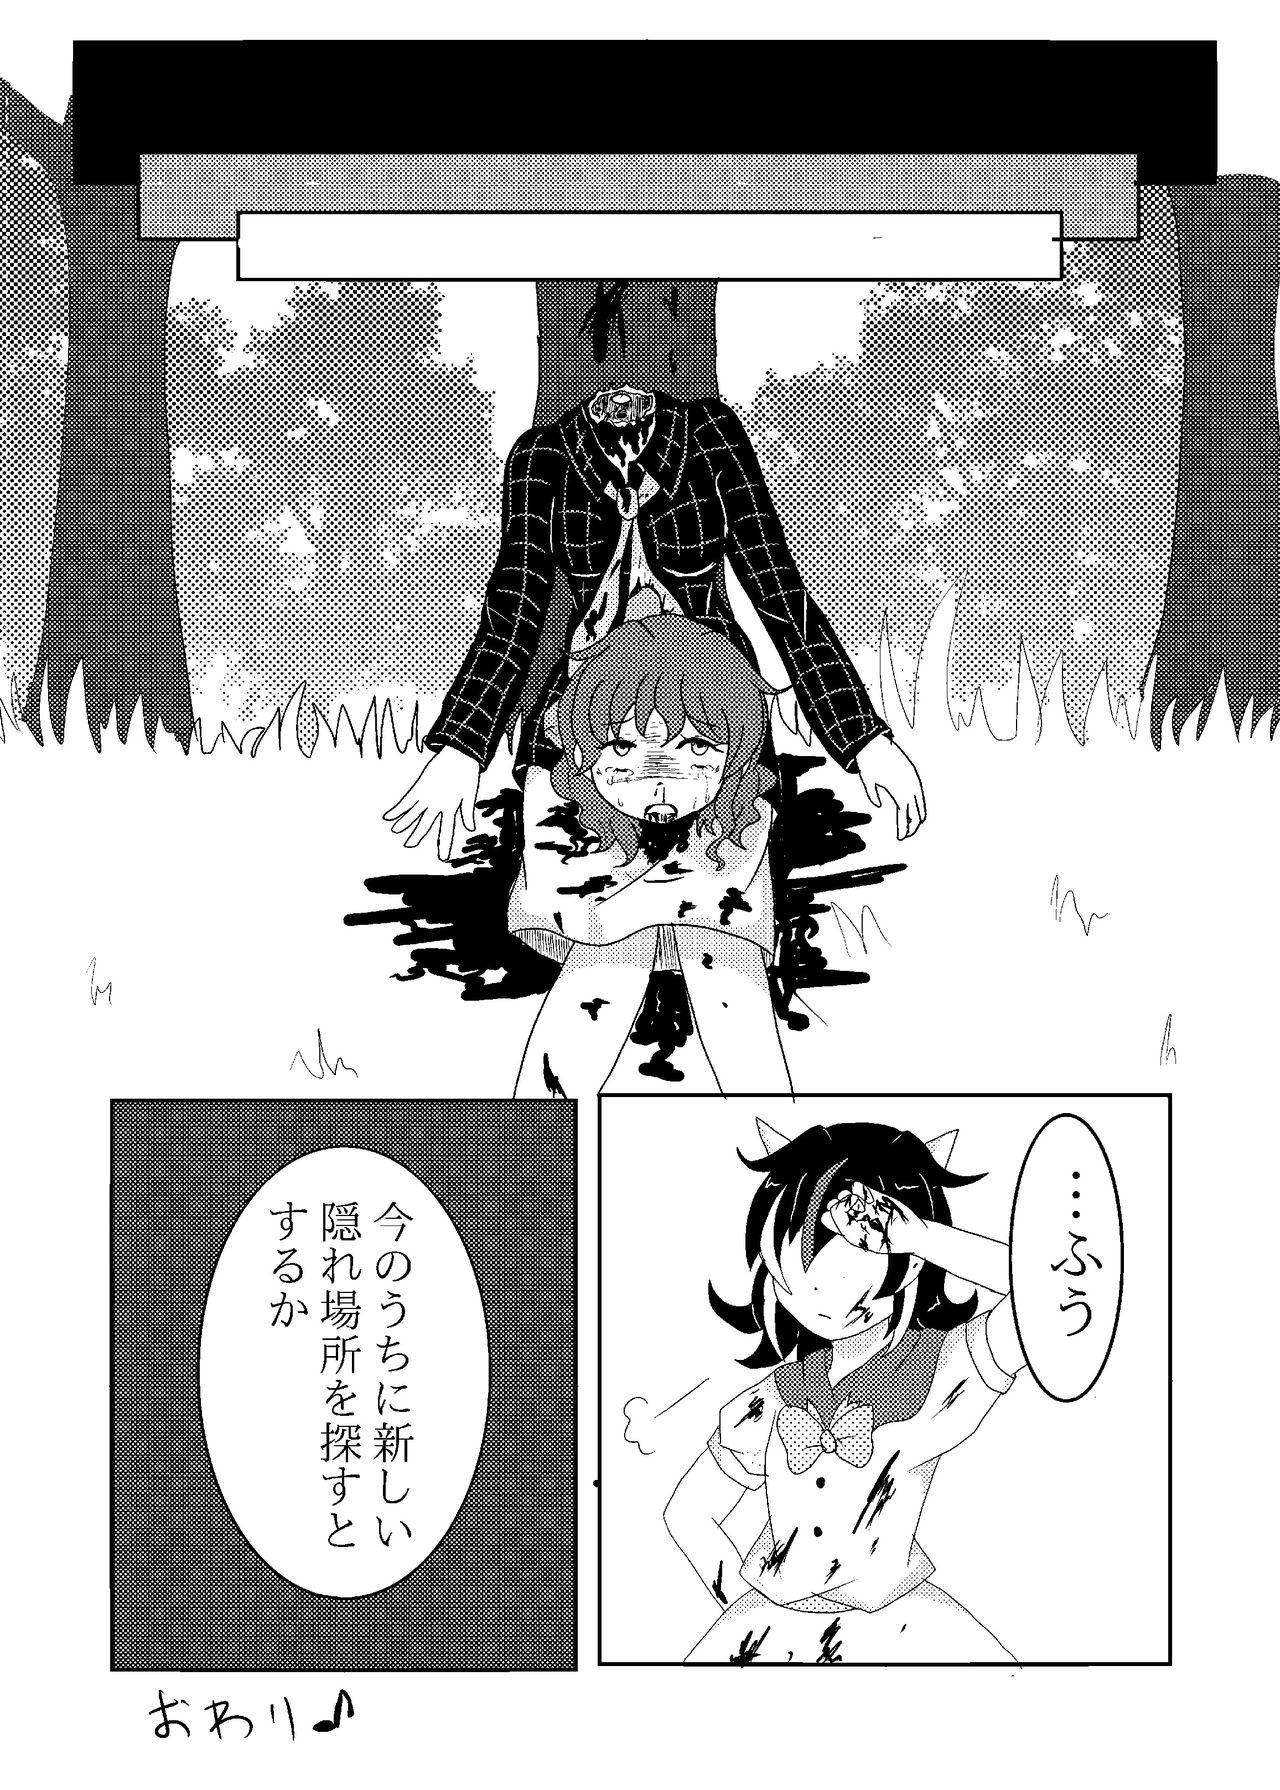 Picked Up IN THE RIGHT WAY - Touhou project Analplay - Page 8